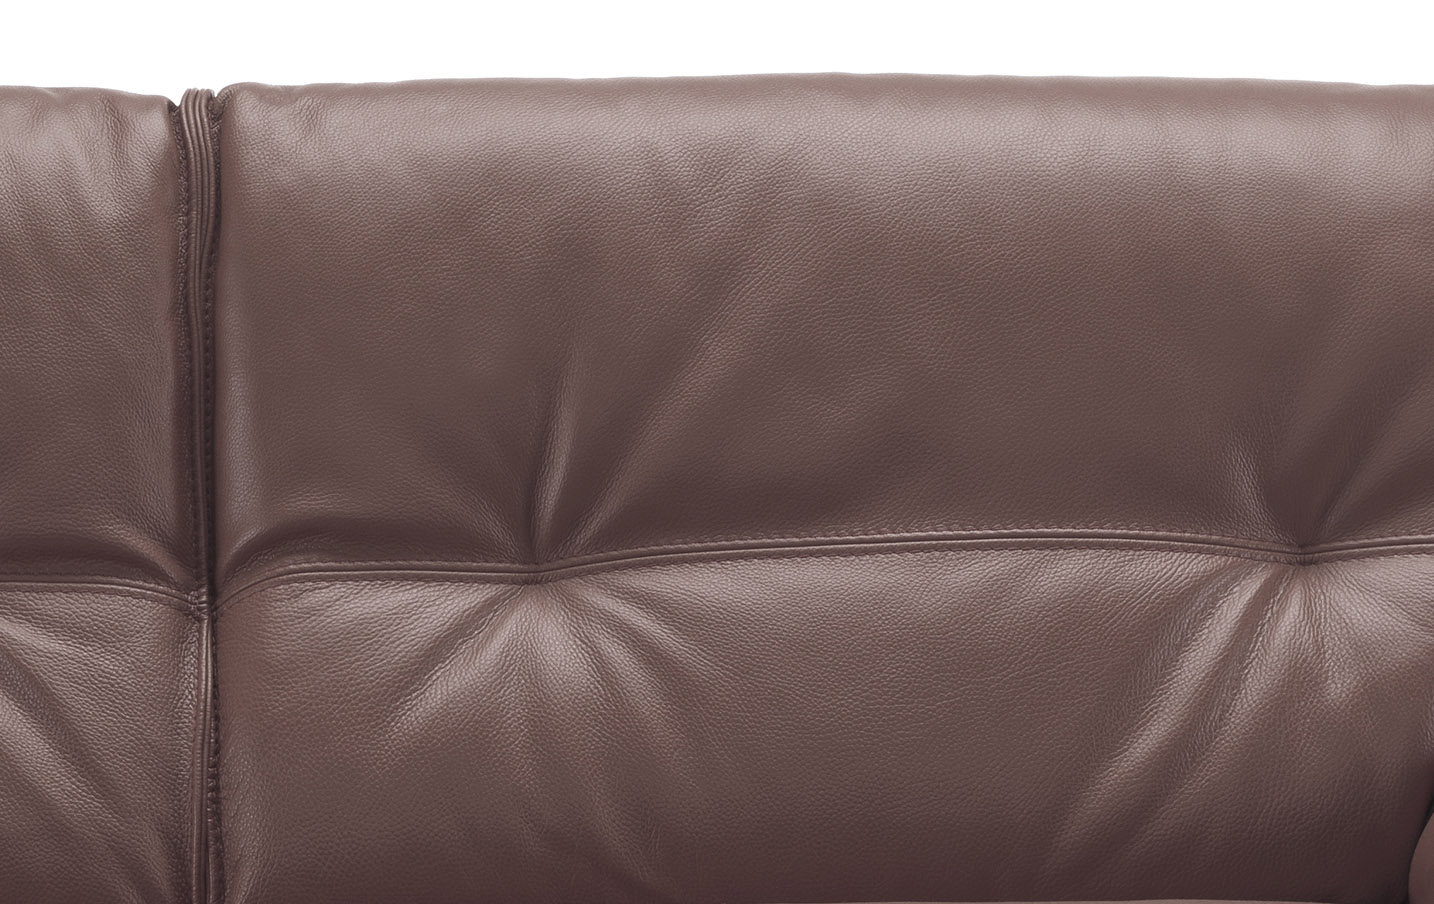 Italian Leather Living Room Set Tufted Back Cushions - Click Image to Close